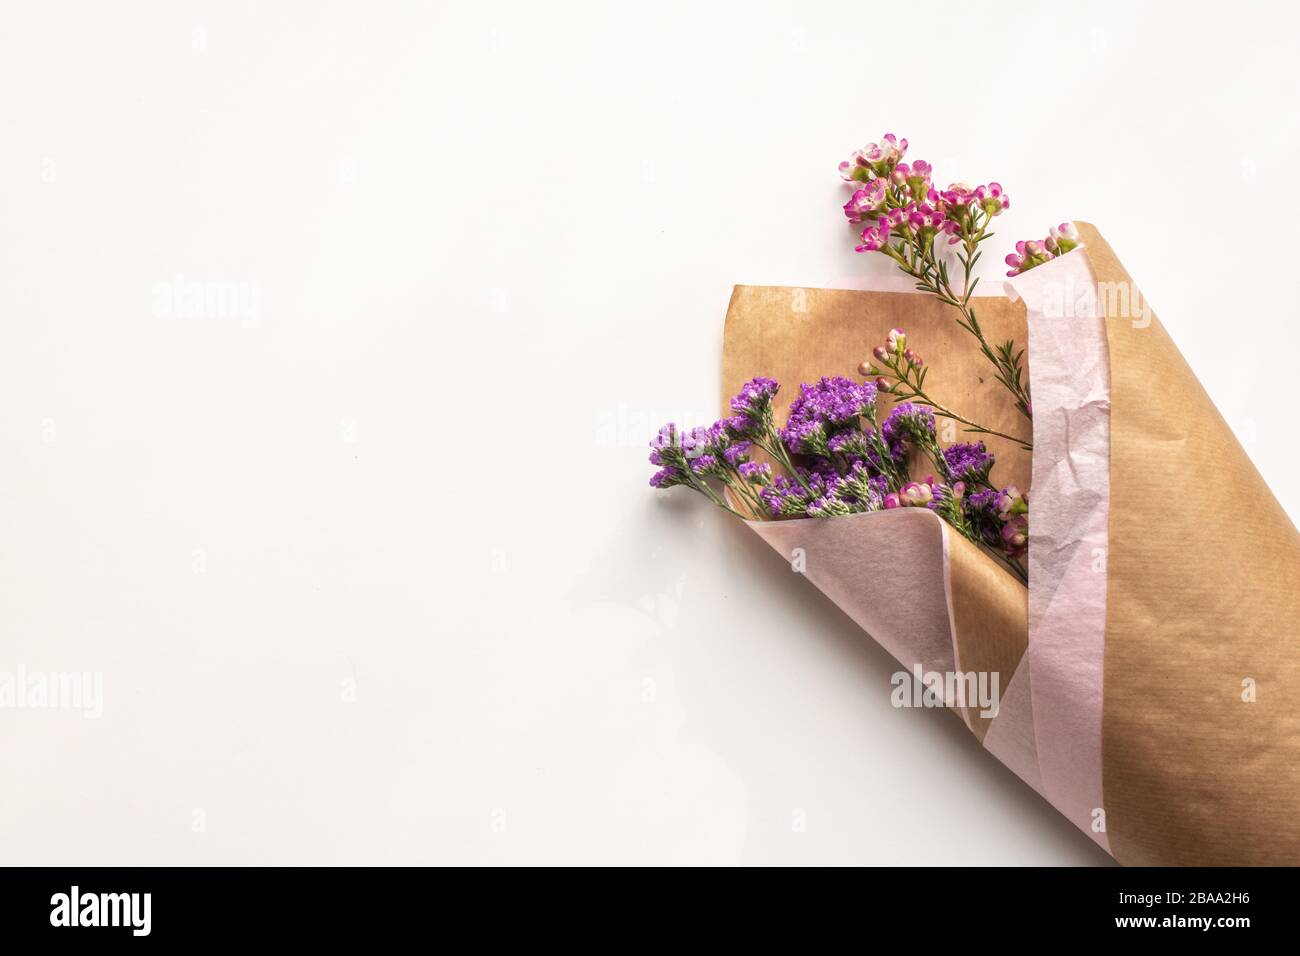 Minimal White bacground, Bunch of flowers, brown paper, pink purple wildflowers feminine concept, female concept, nature, beauty, delicate Stock Photo